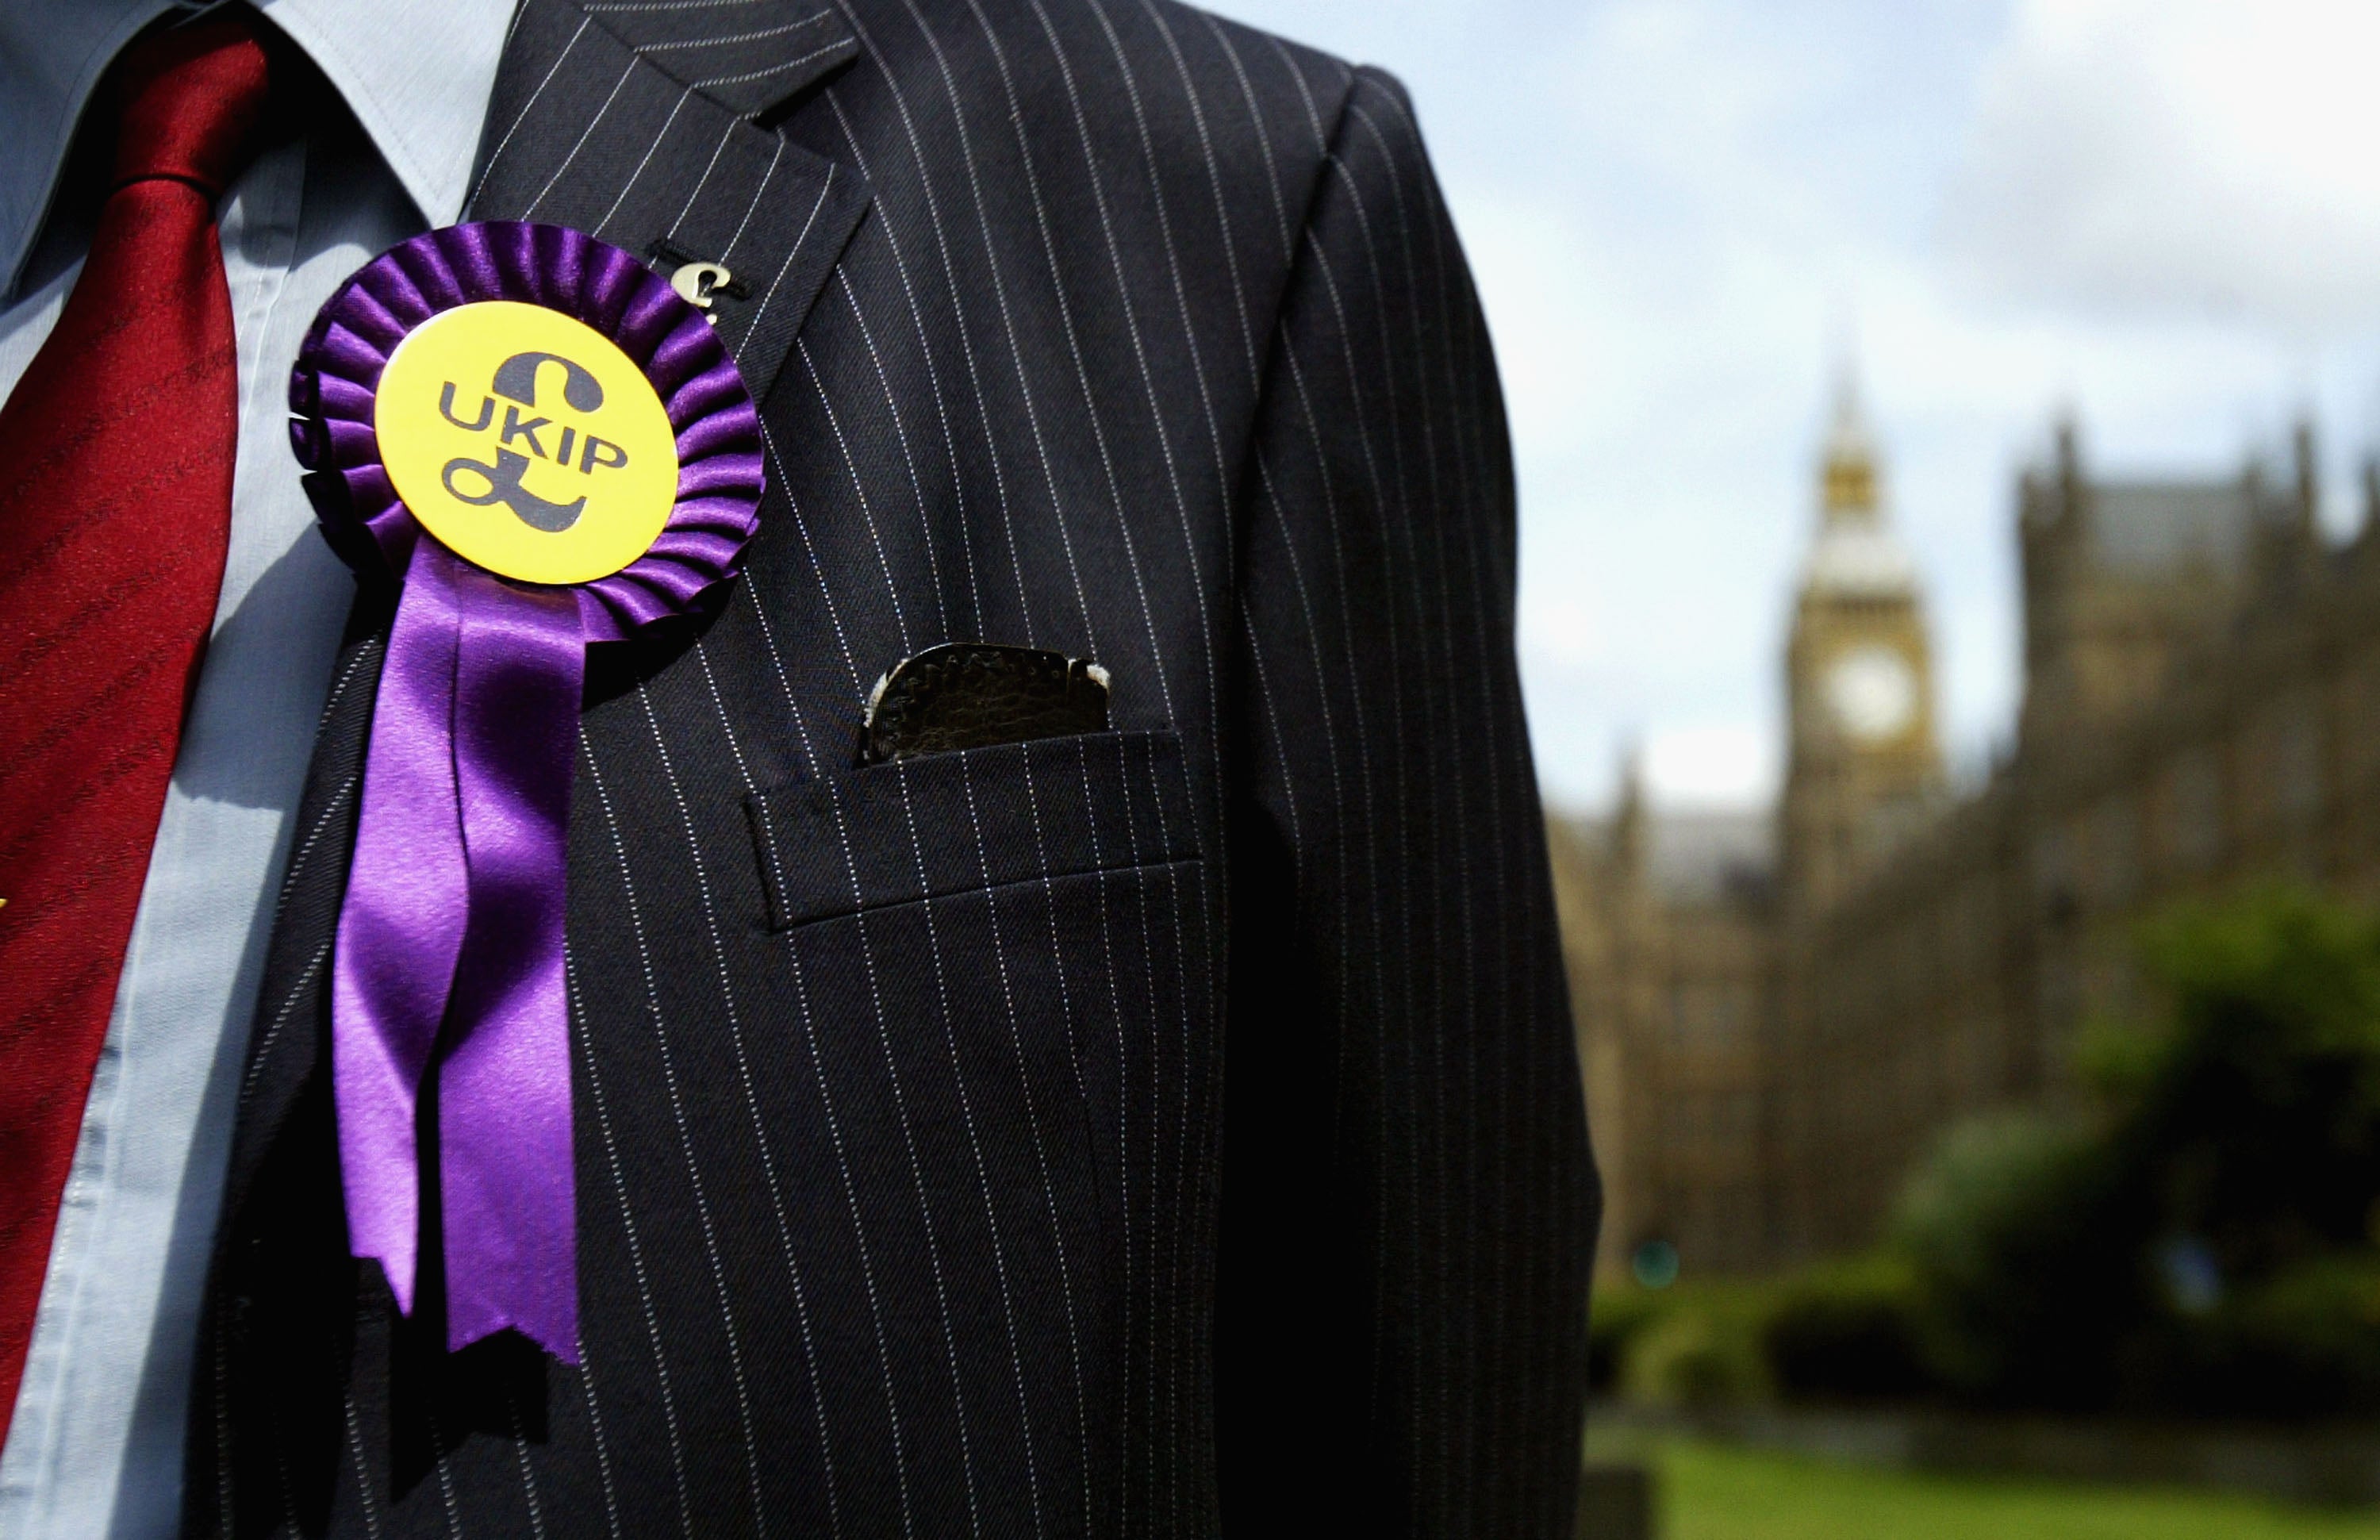 A Ukip candidate has announced that he would want to 'licence mosques' if elected